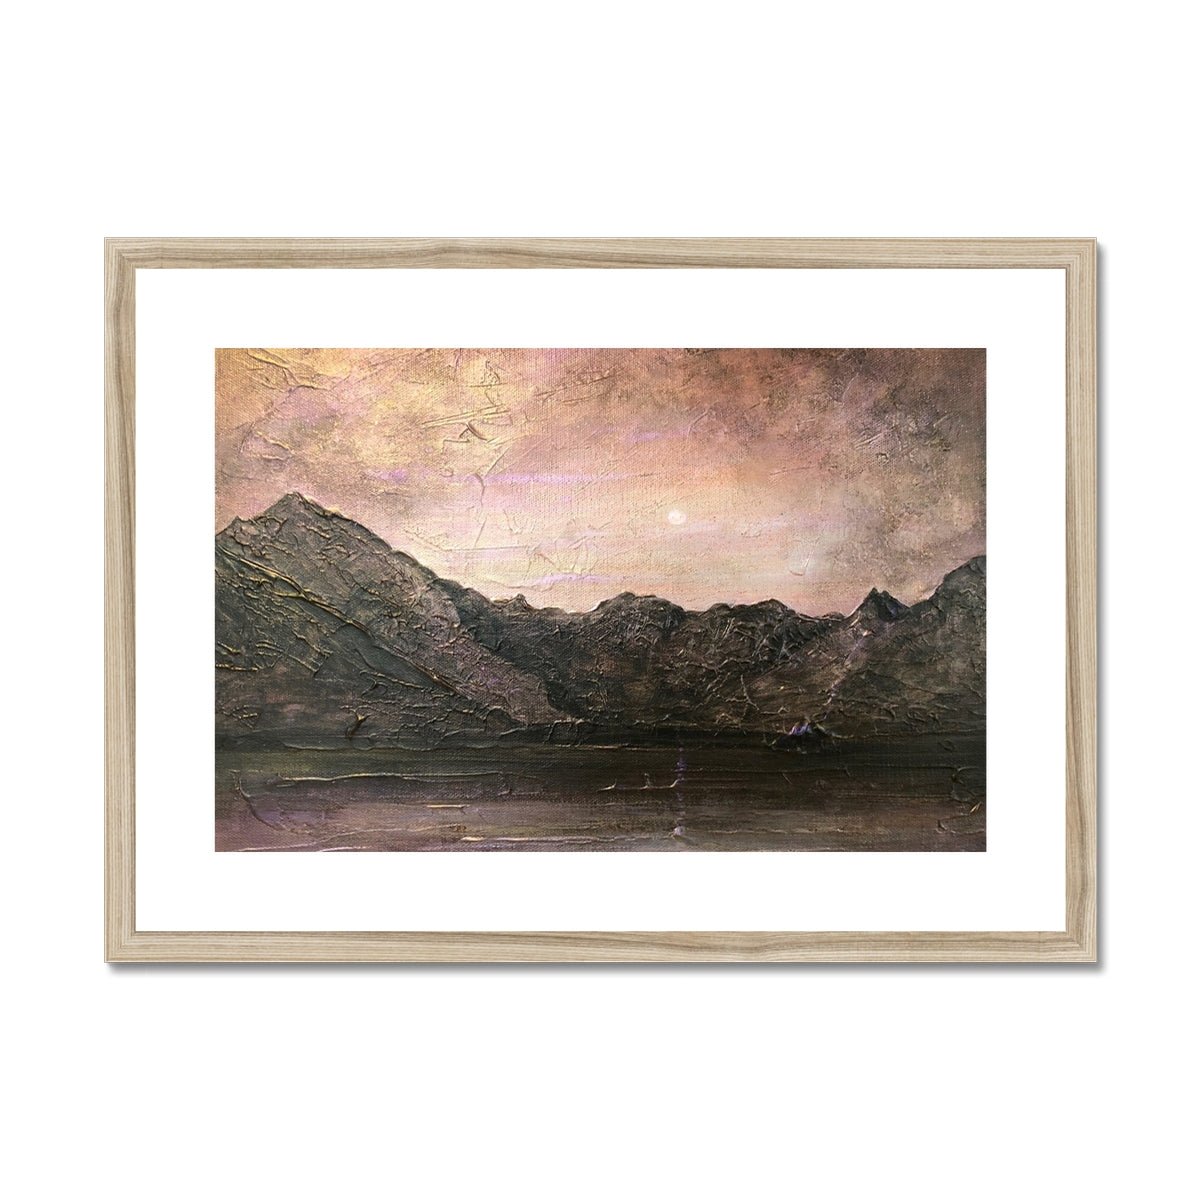 Dubh Ridge Moonlight Skye Painting | Framed & Mounted Prints From Scotland-Framed & Mounted Prints-Skye Art Gallery-A2 Landscape-Natural Frame-Paintings, Prints, Homeware, Art Gifts From Scotland By Scottish Artist Kevin Hunter